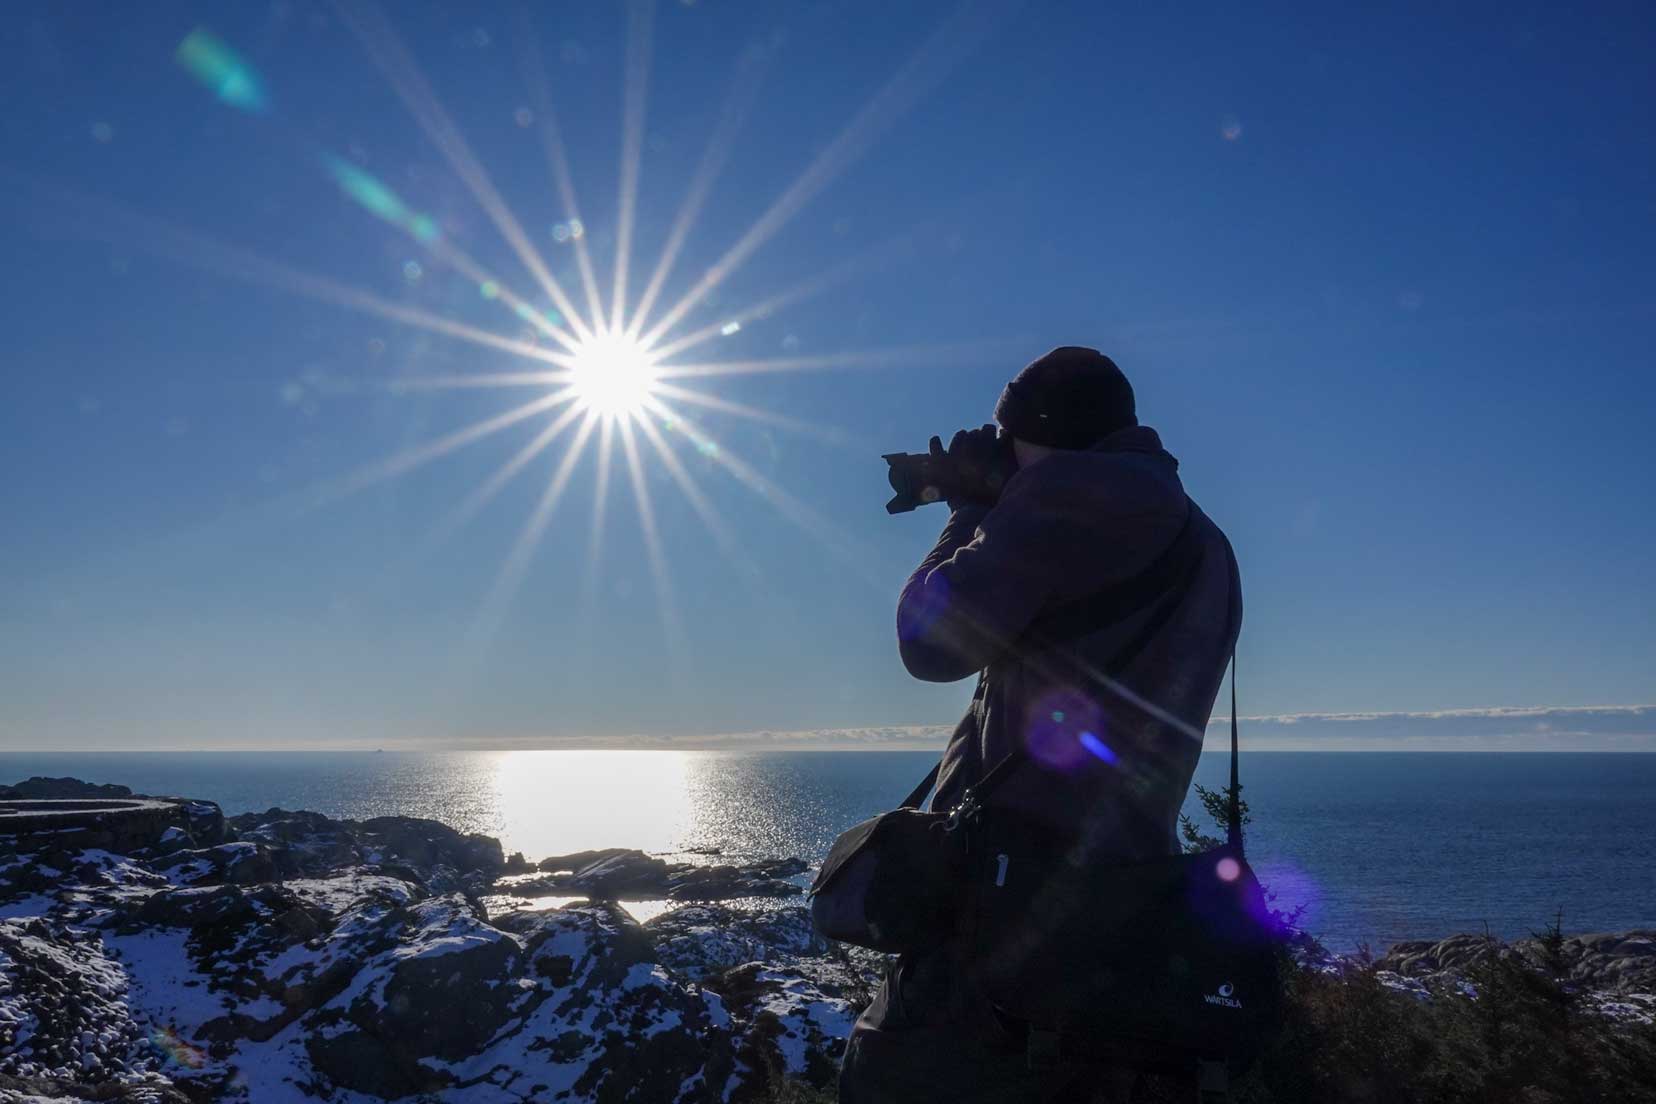 Sun-star-in-Norway with man taking photo in foreground and ocean in teh background